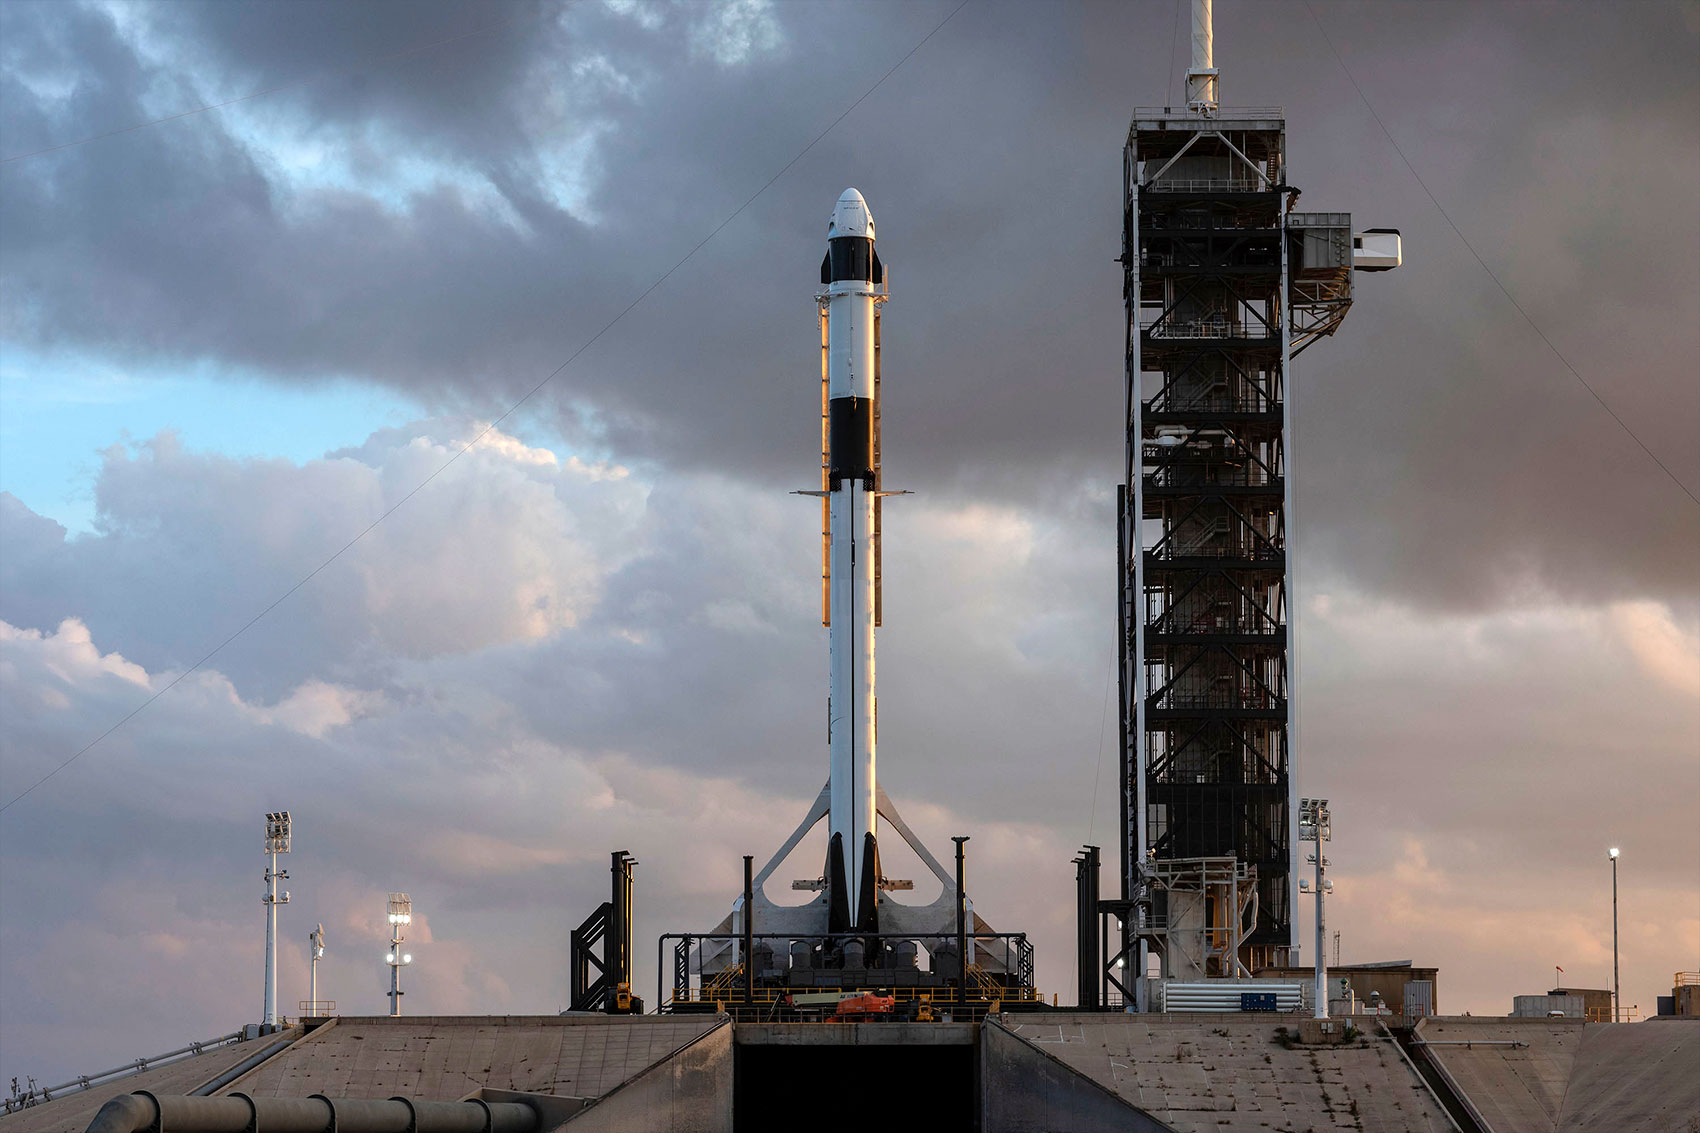 Kennedy Space Center Visitor Complex Offers Special Viewing Opportunities for the Commercial Crew SpaceX Demonstration Mission 1 (Demo-1) Launch